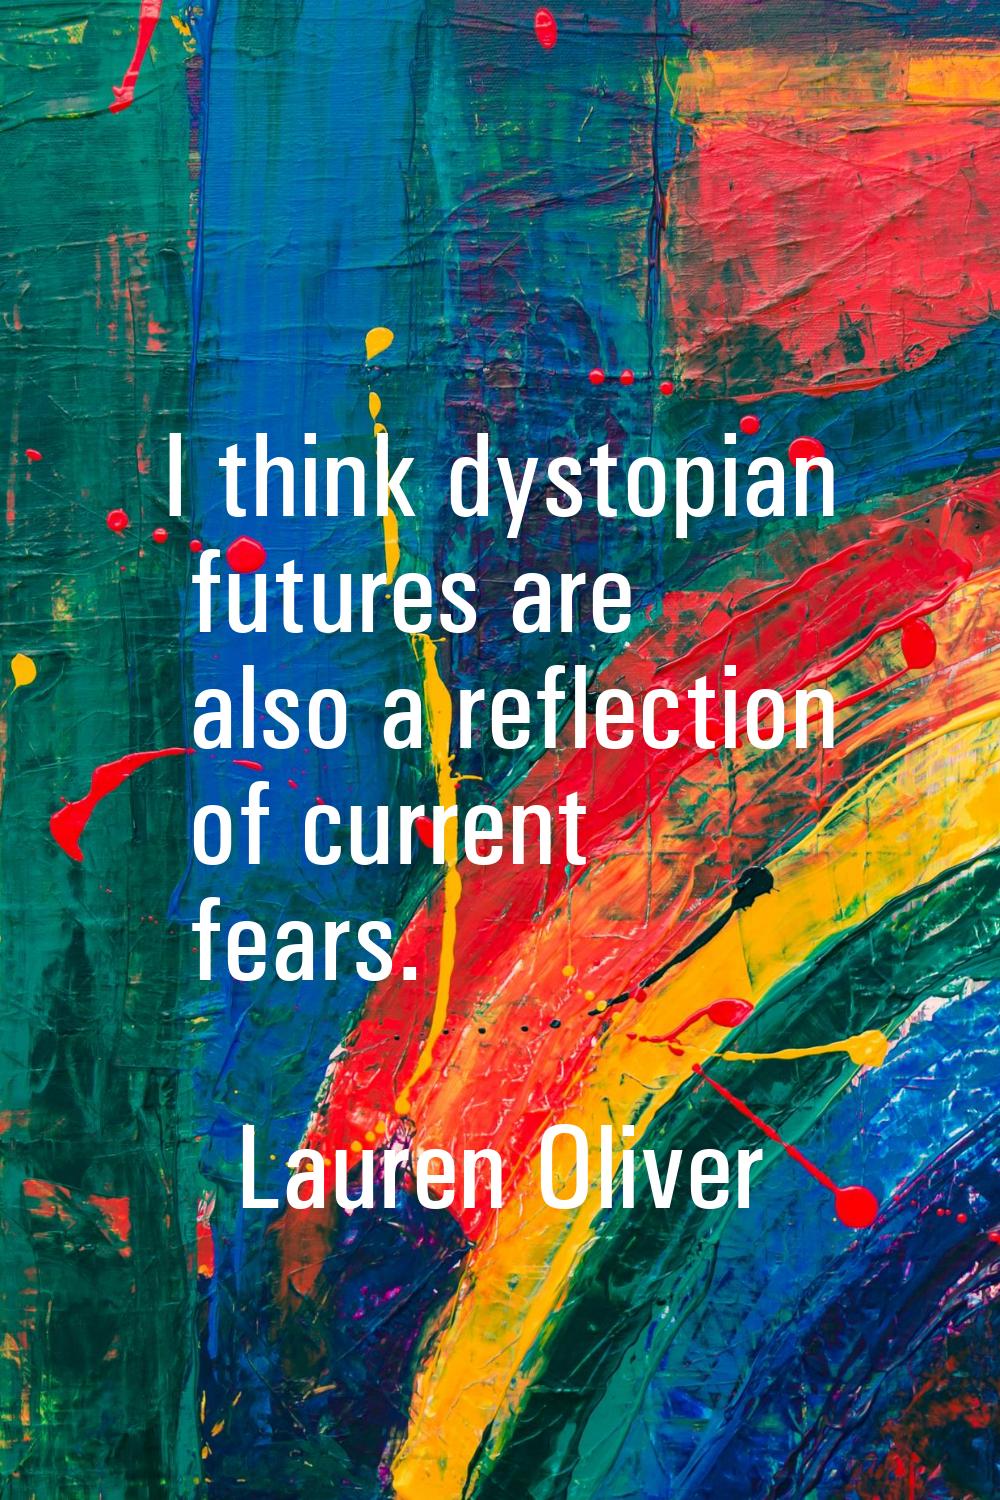 I think dystopian futures are also a reflection of current fears.